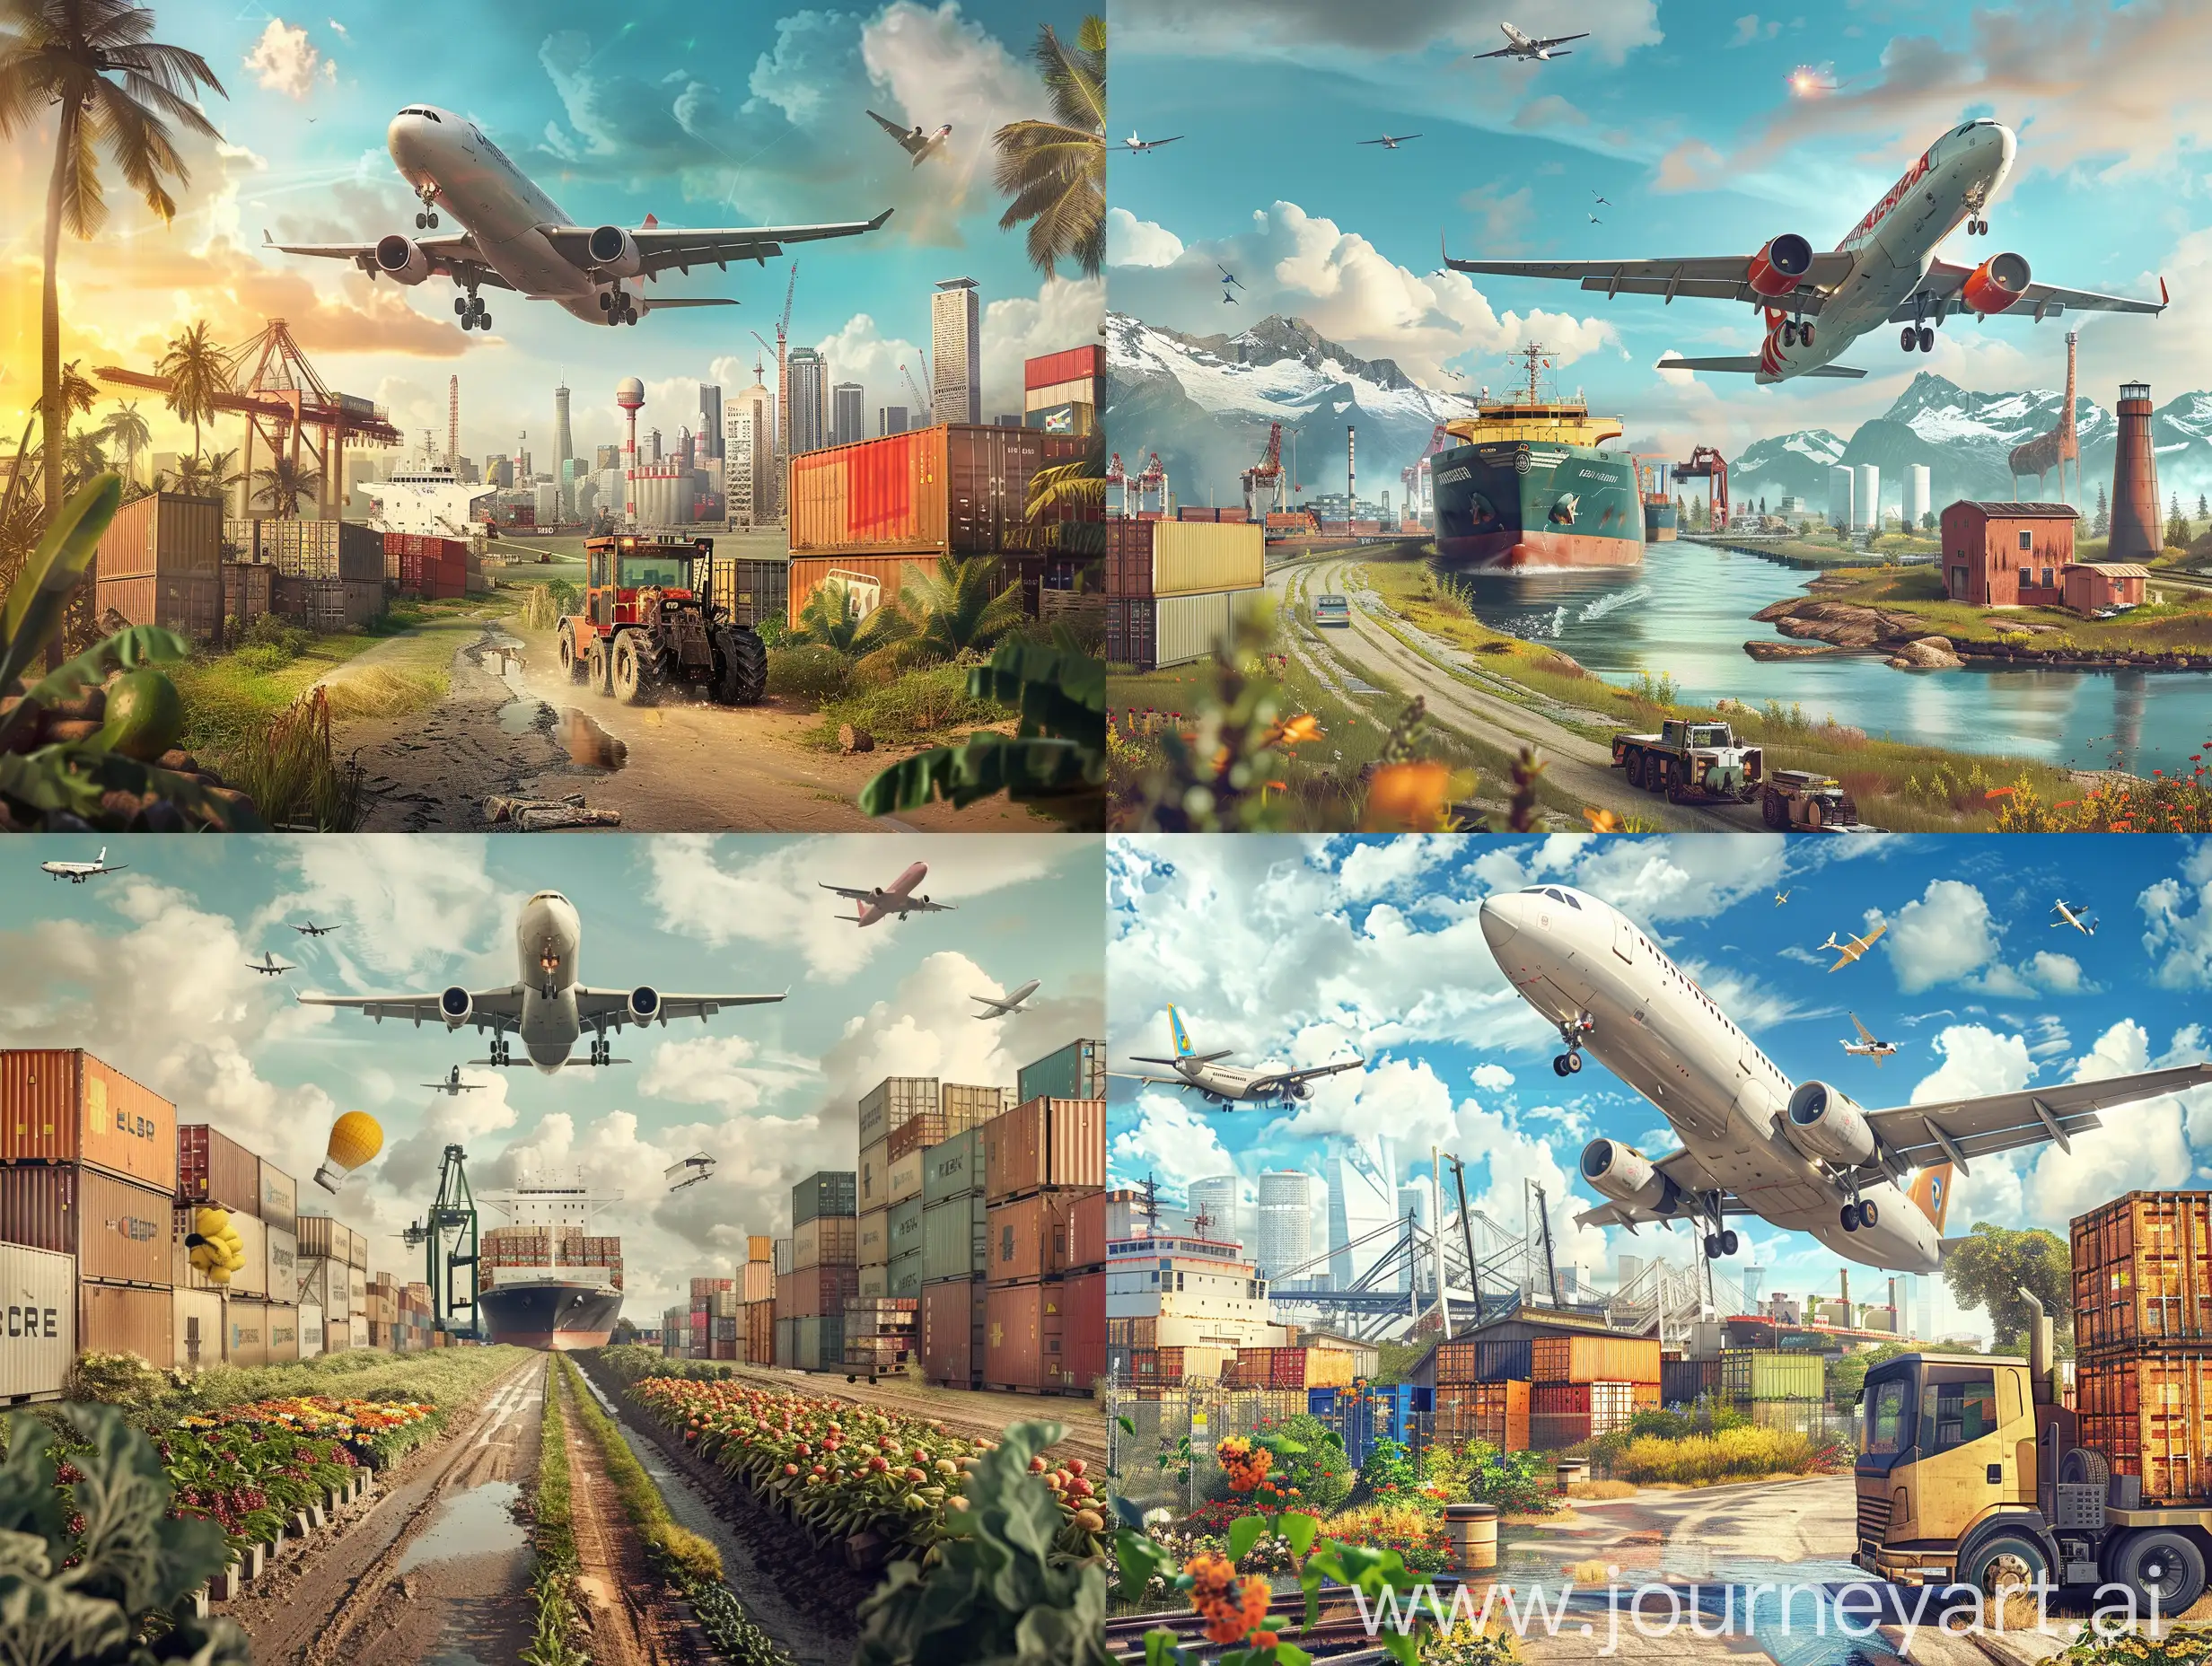 an import export company illustration, realistic photoshop movie poster-like edit containing elements like airplane, cargo ship, containers, real estate, and farm products  